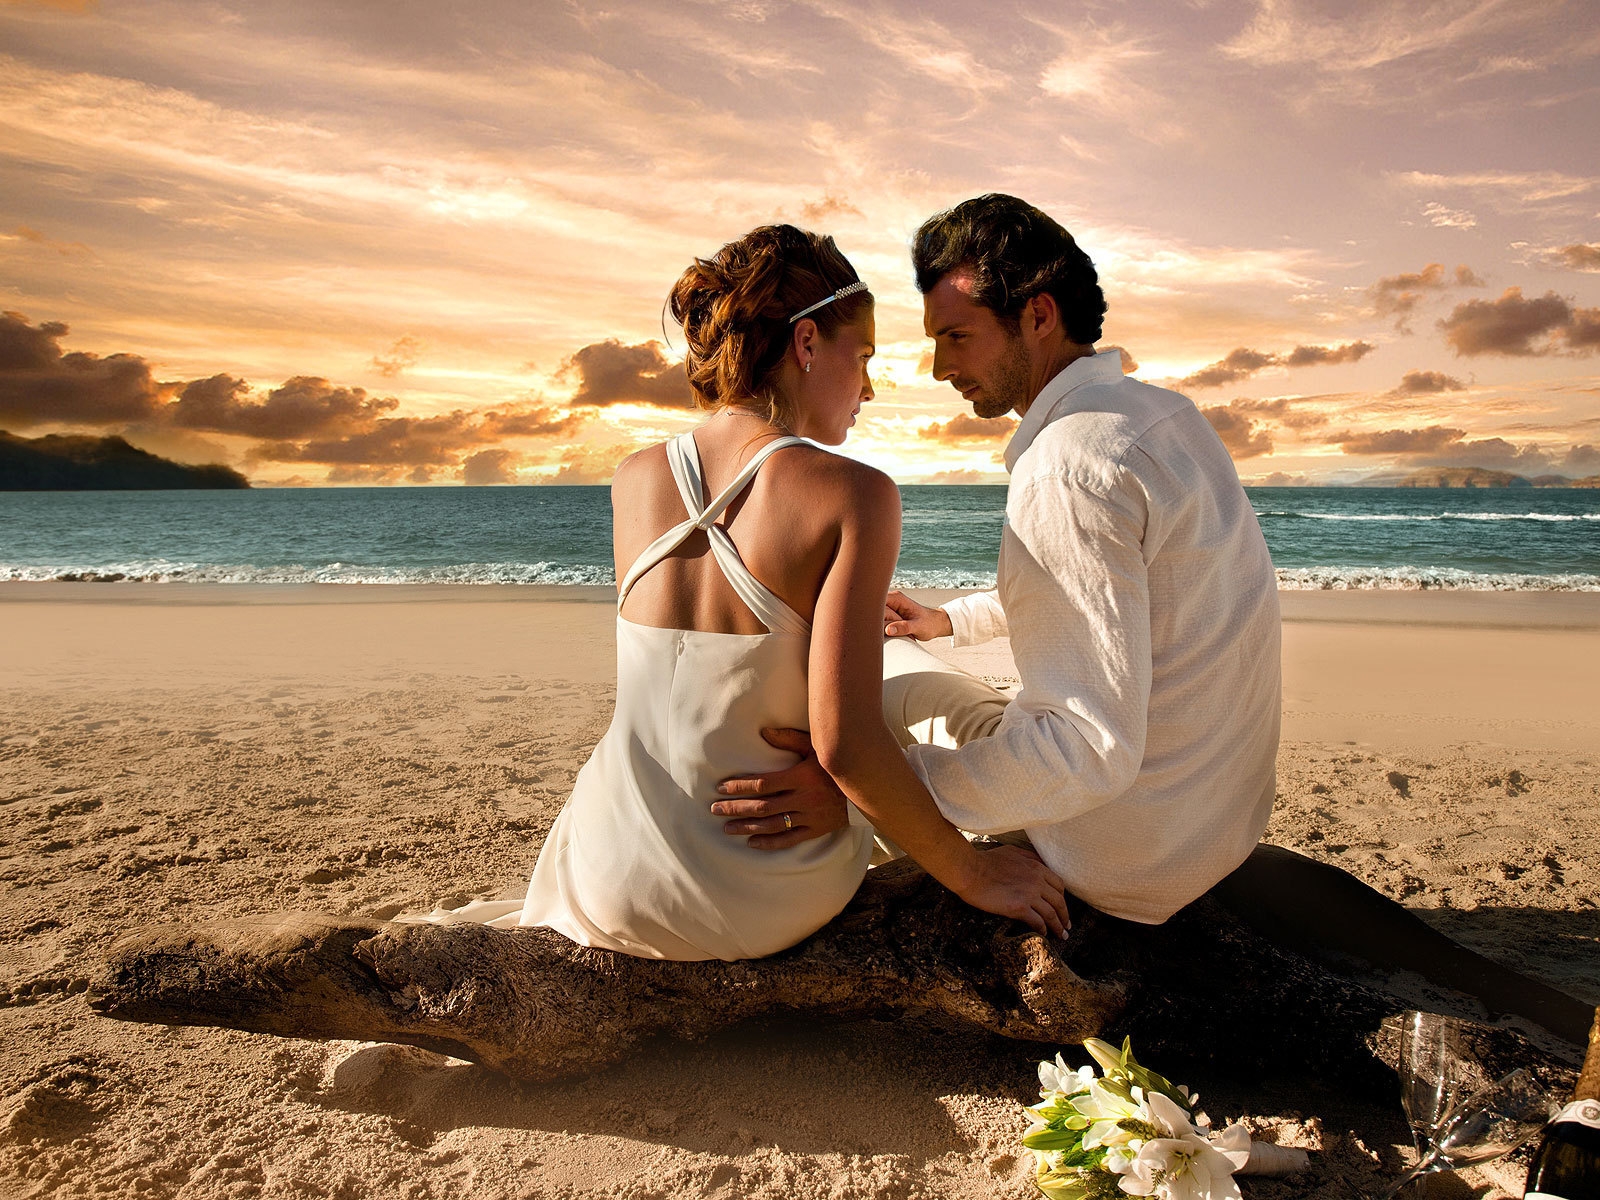 Hd love couples wallpapers